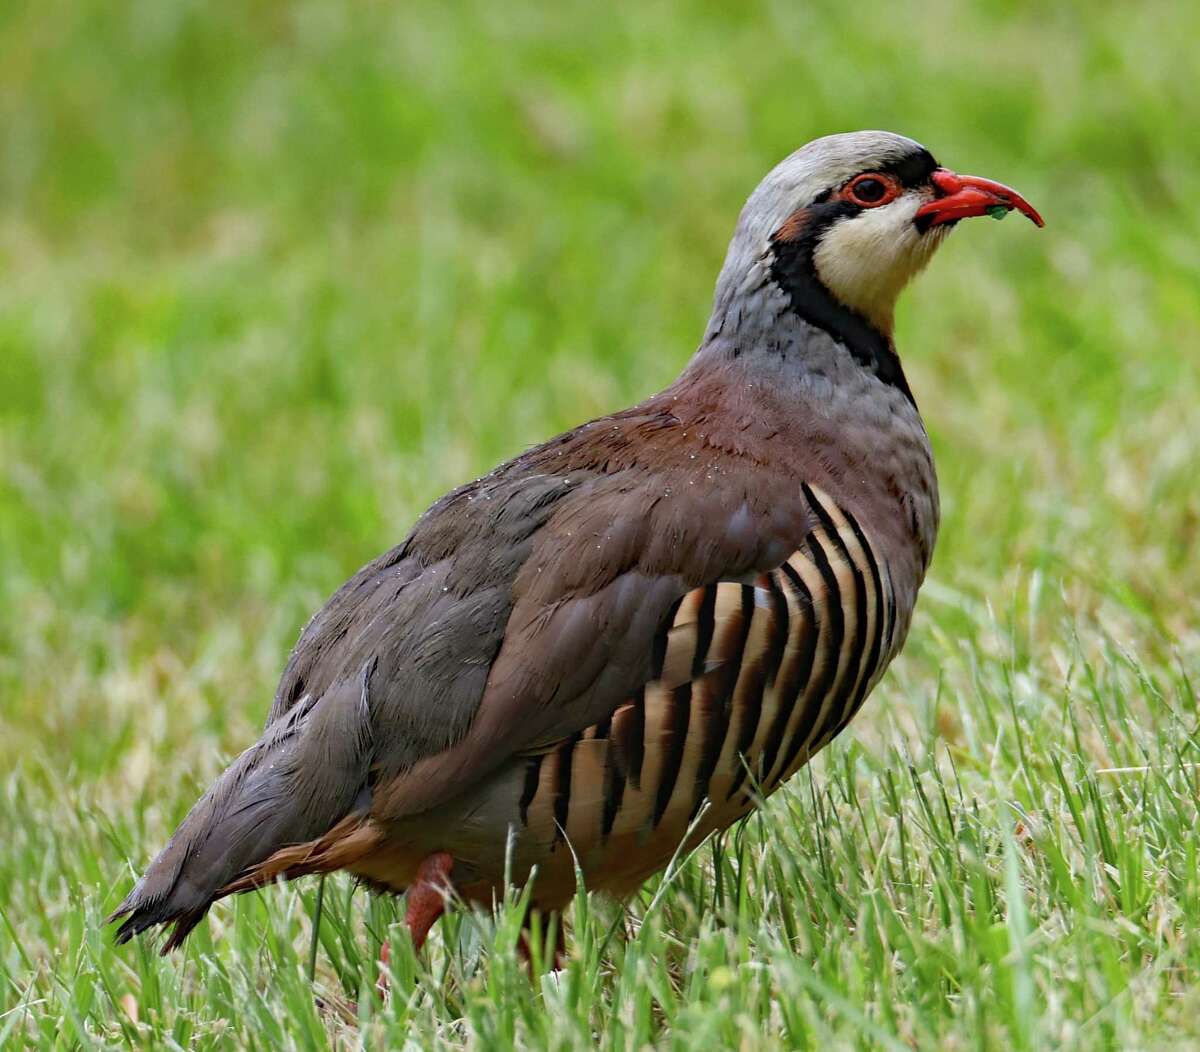 Surprised to see this Chukar in Fort Miller today (June 5). Not native to New York. Range is mainly Nevada. Taken by David Handy, Schenectady.